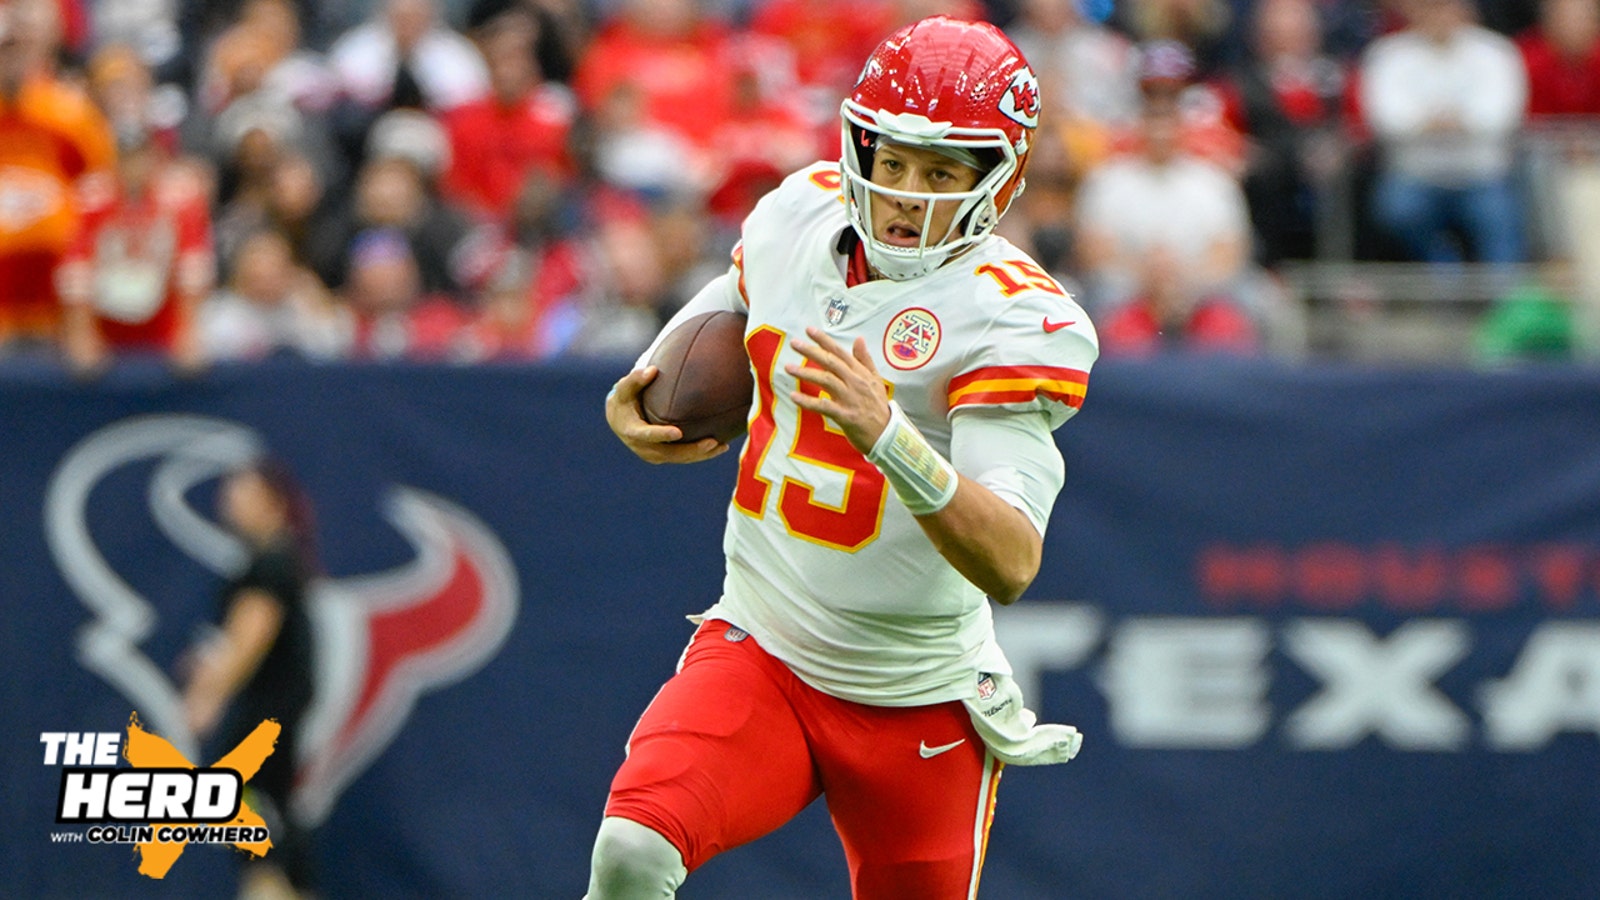 Is Patrick Mahomes' greatness being taken for granted?